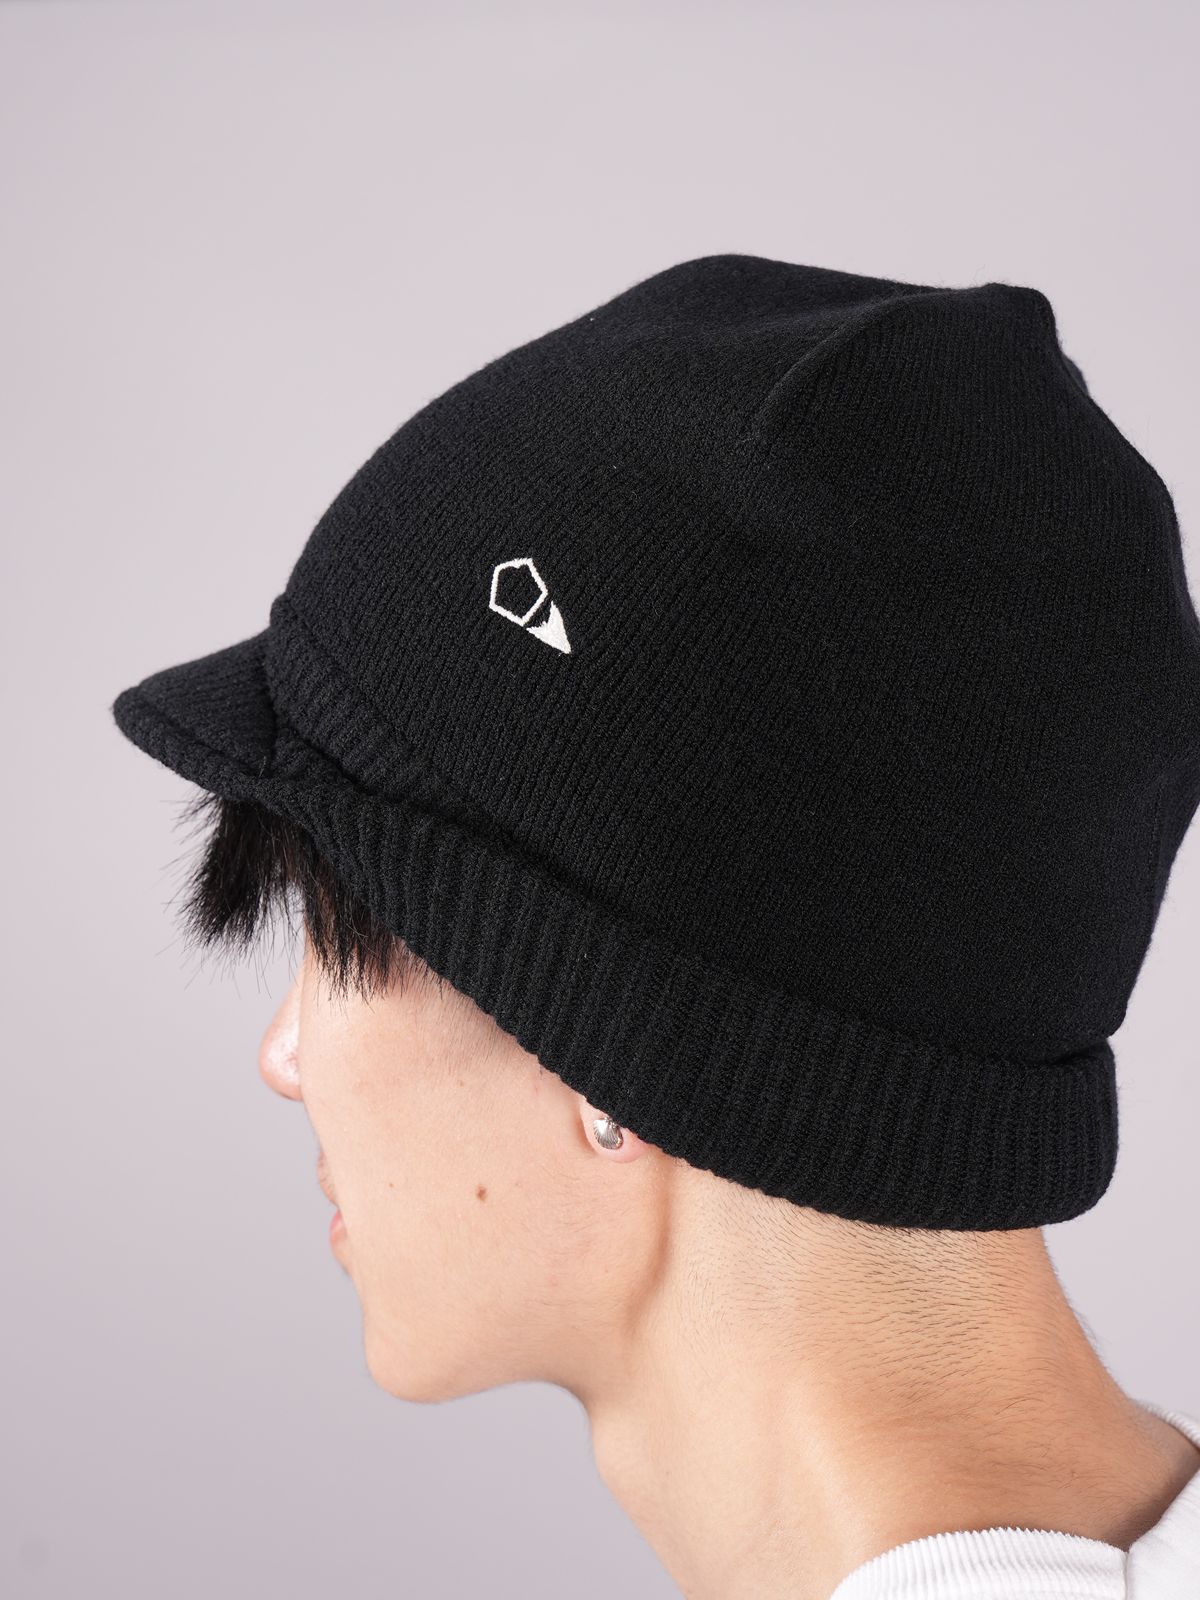 STONE ISLAND SHADOW PROJECT - N022V SHAPED BEANIE_CHAPTER 2 